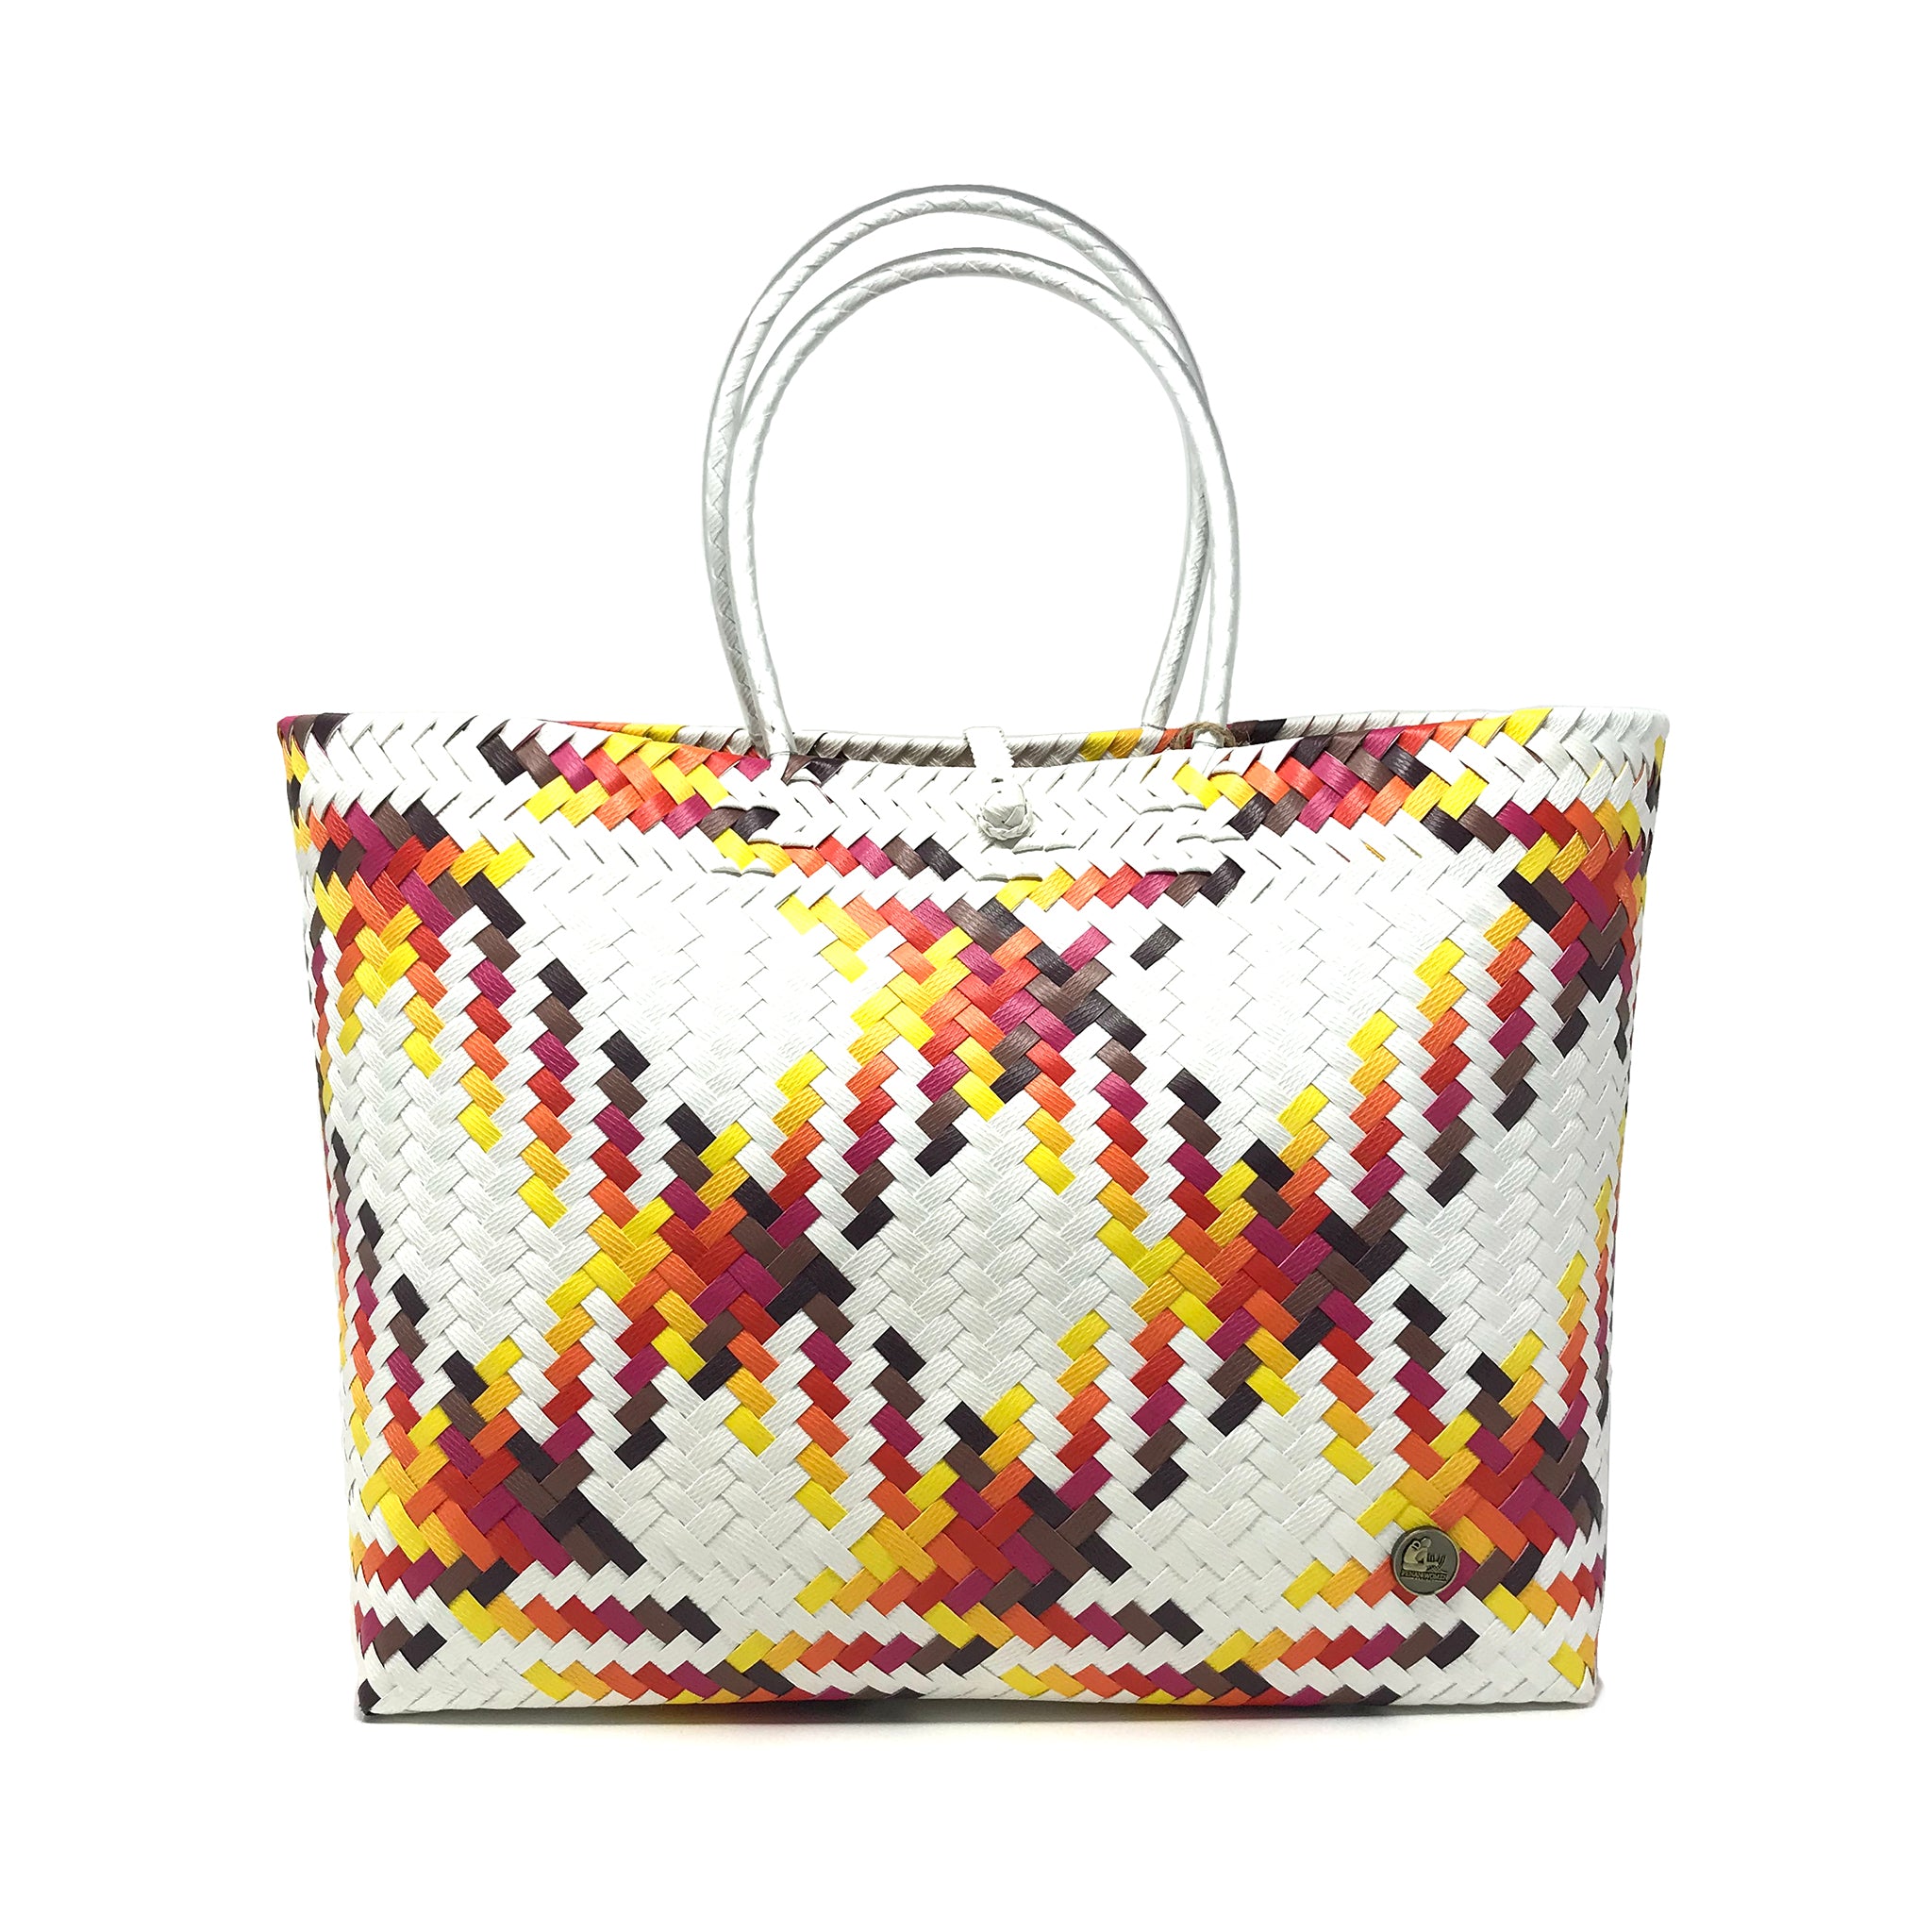 Red, yellow and white large size tote bag facing the front.